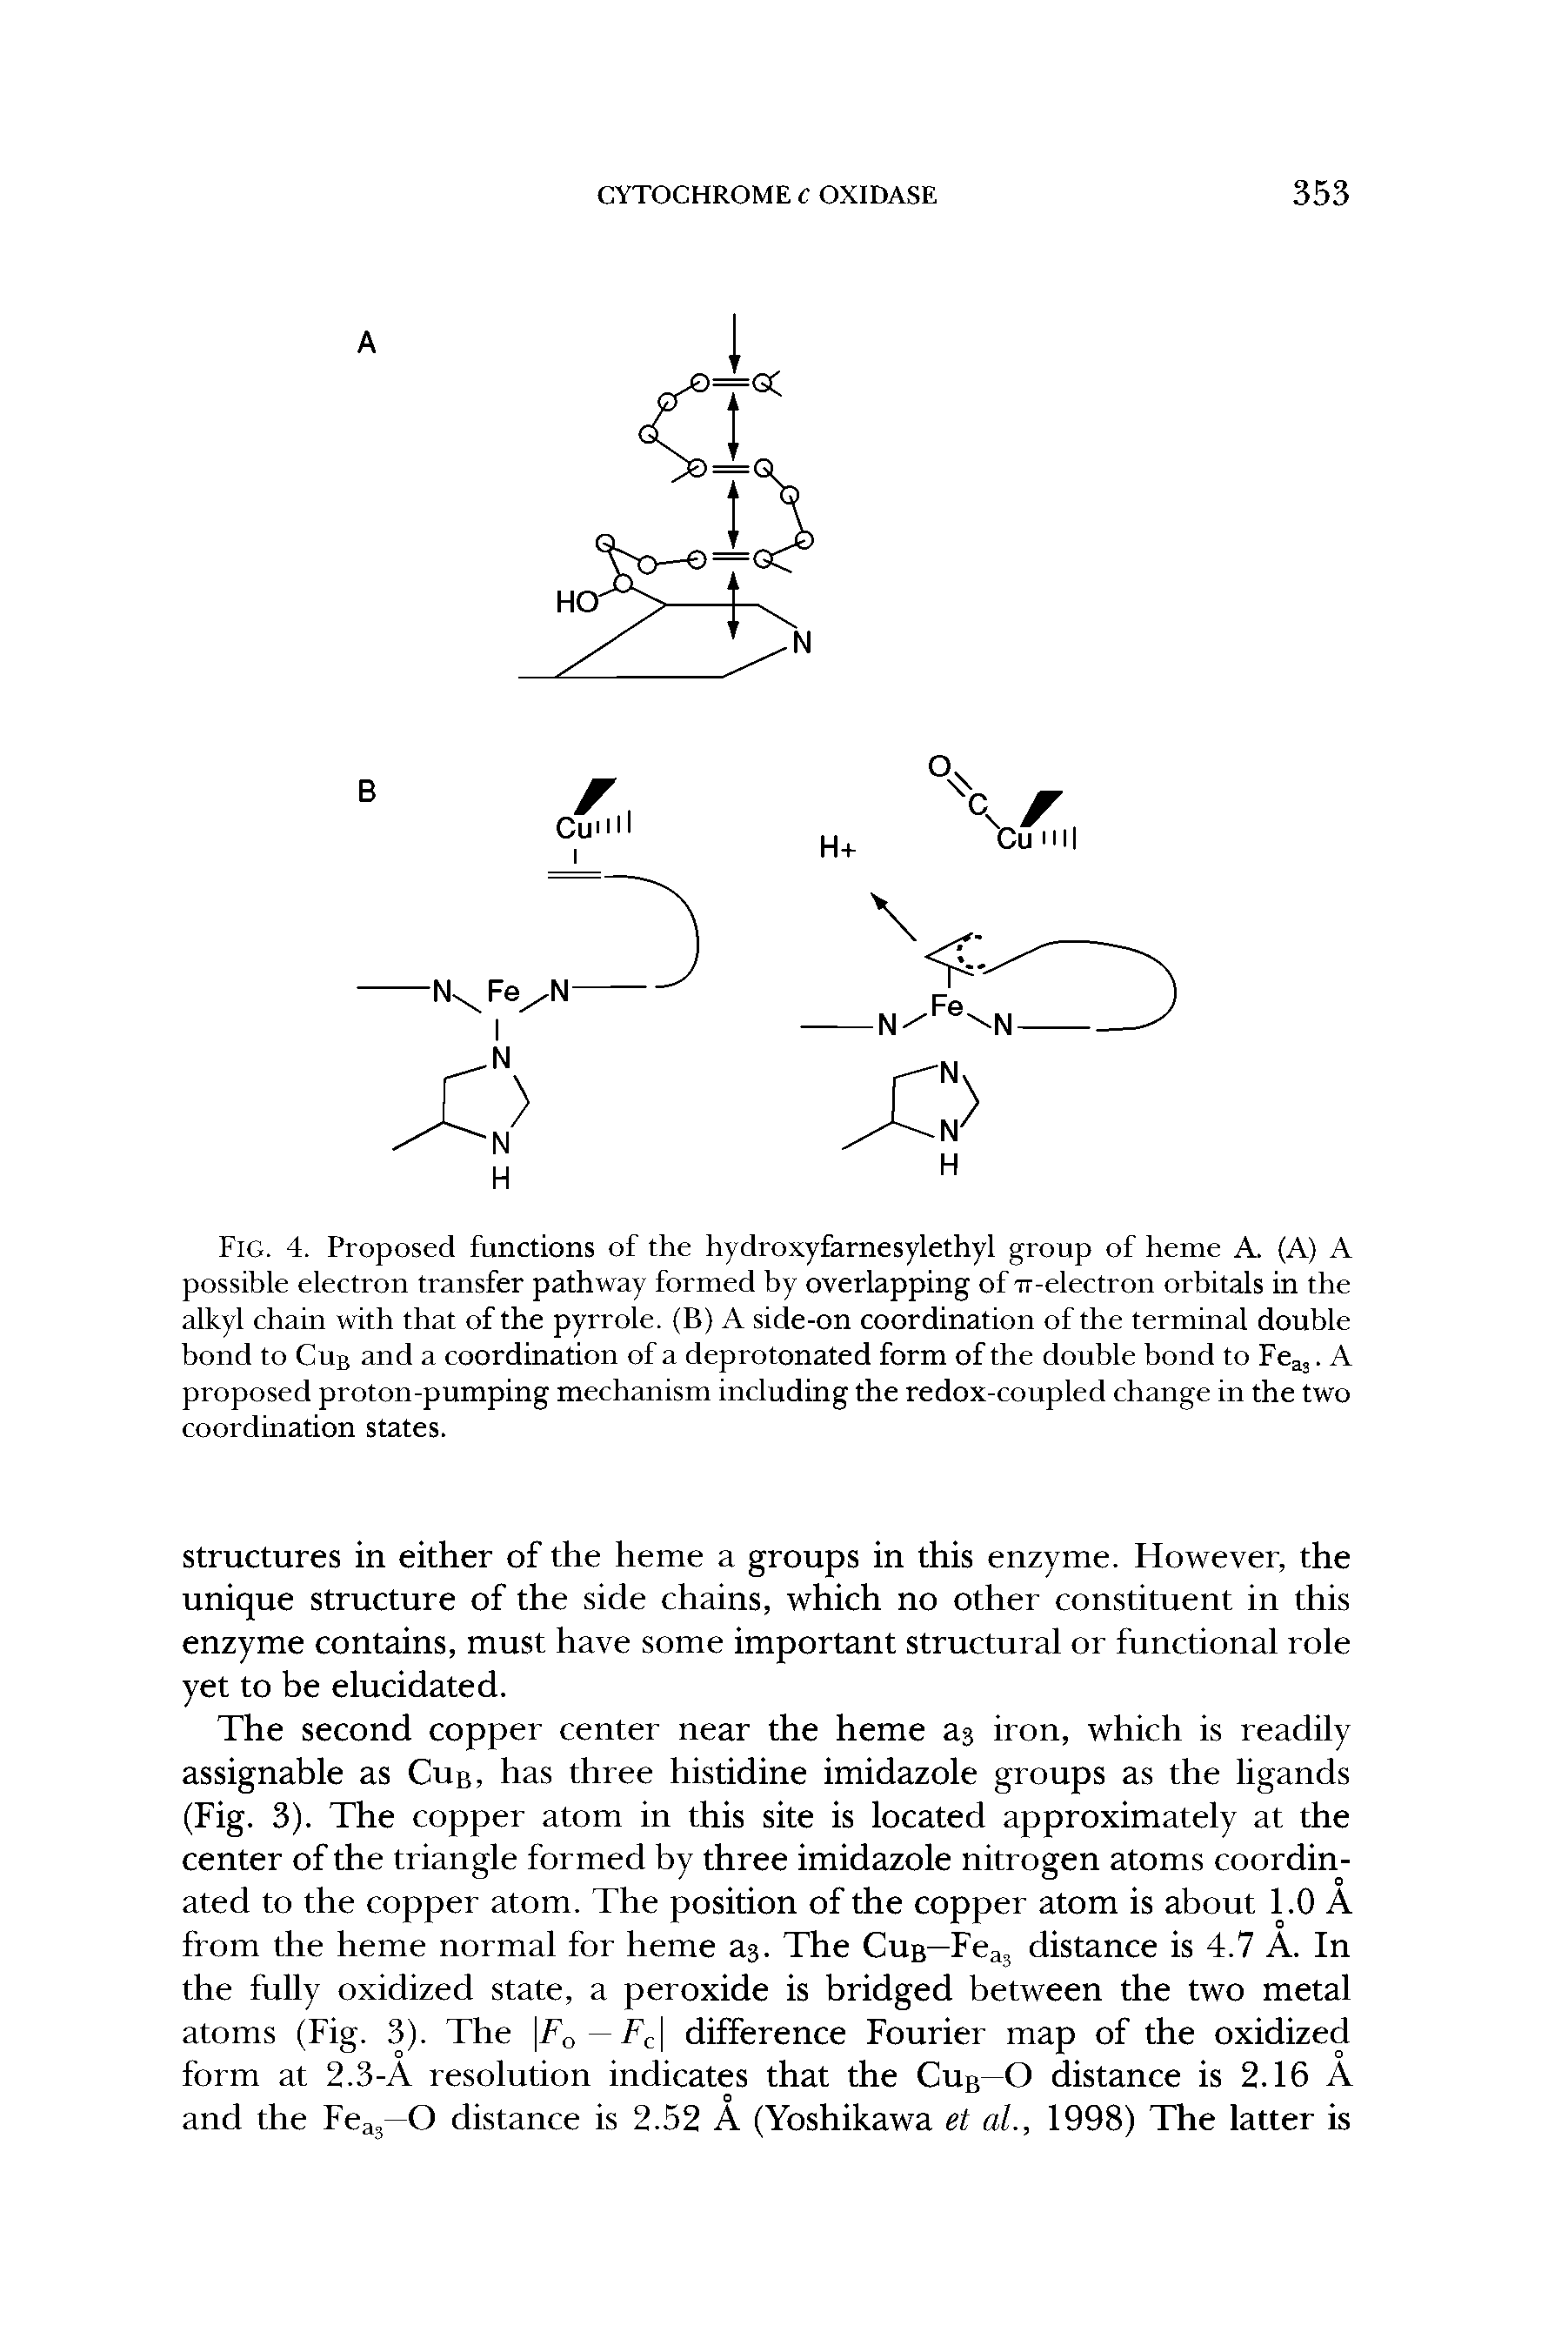 Fig. 4. Proposed functions of the hydroxyfarnesylethyl group of heme A. (A) A possible electron transfer pathway formed by overlapping of rr-electron orbitals in the alkyl chain with that of the pyrrole. (B) A side-on coordination of the terminal double bond to Cub and a coordination of a deprotonated form of the double bond to Fe j. A proposed proton-pumping mechanism including the redox-coupled change in the two coordination states.